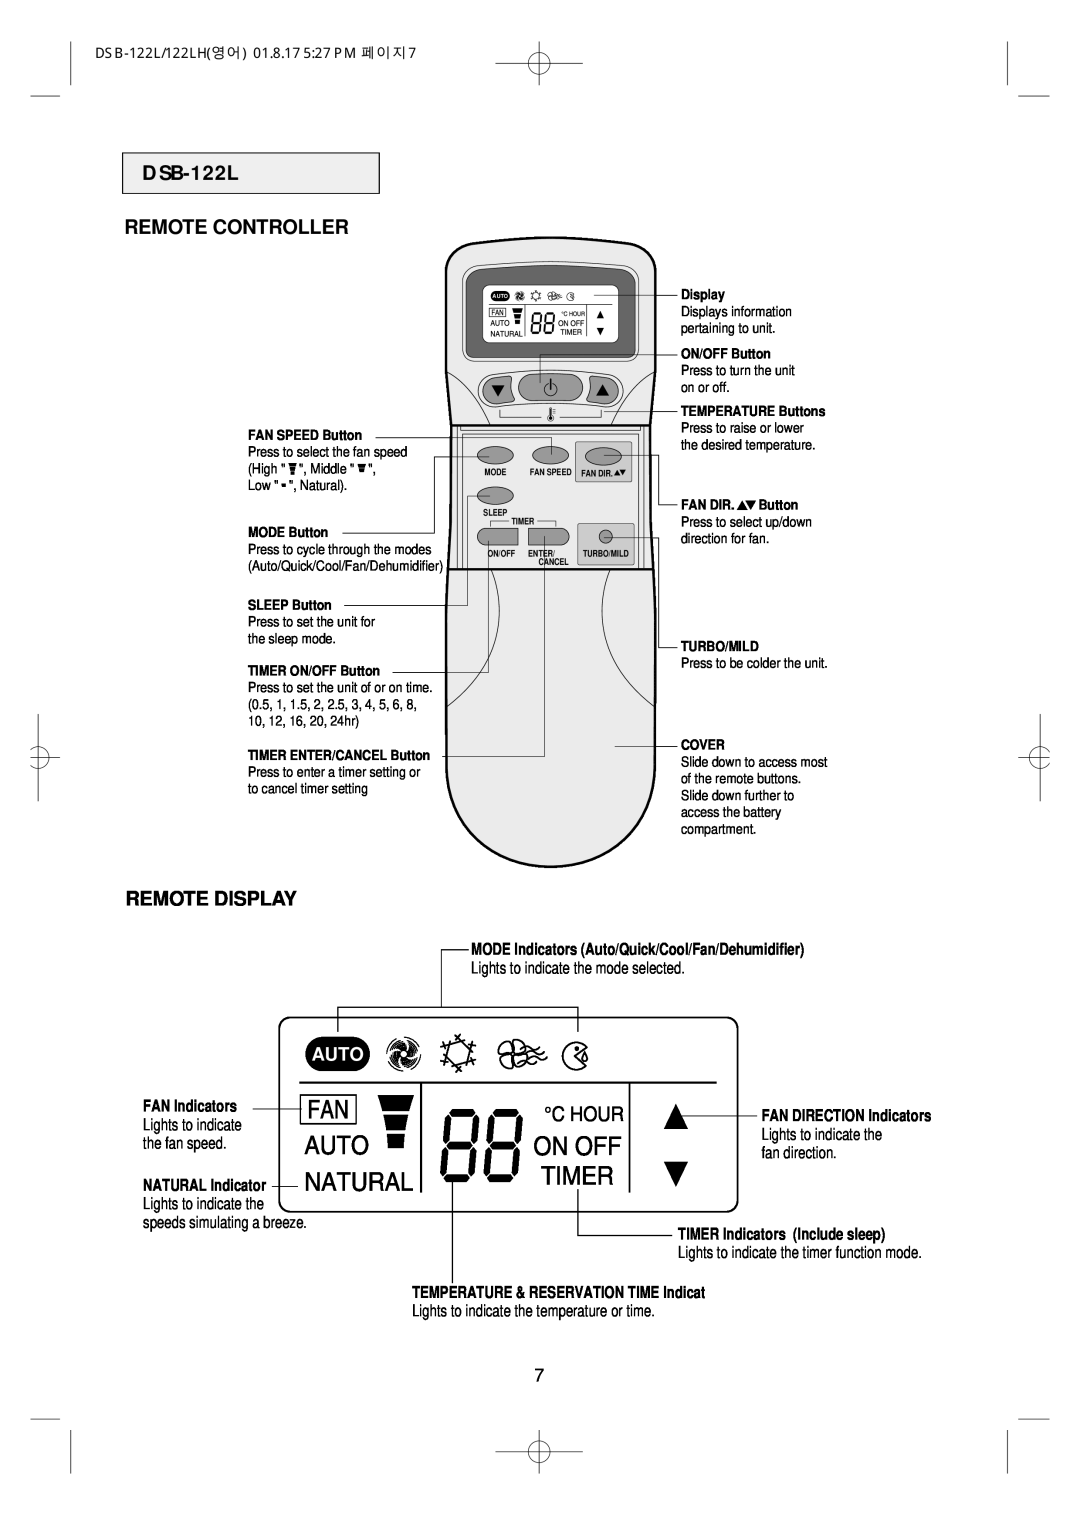 Daewoo DSB-122LH Remote Controller, Remote Display, MODE Indicators Auto/Quick/Cool/Fan/Dehumidifier, FAN SPEED Button 